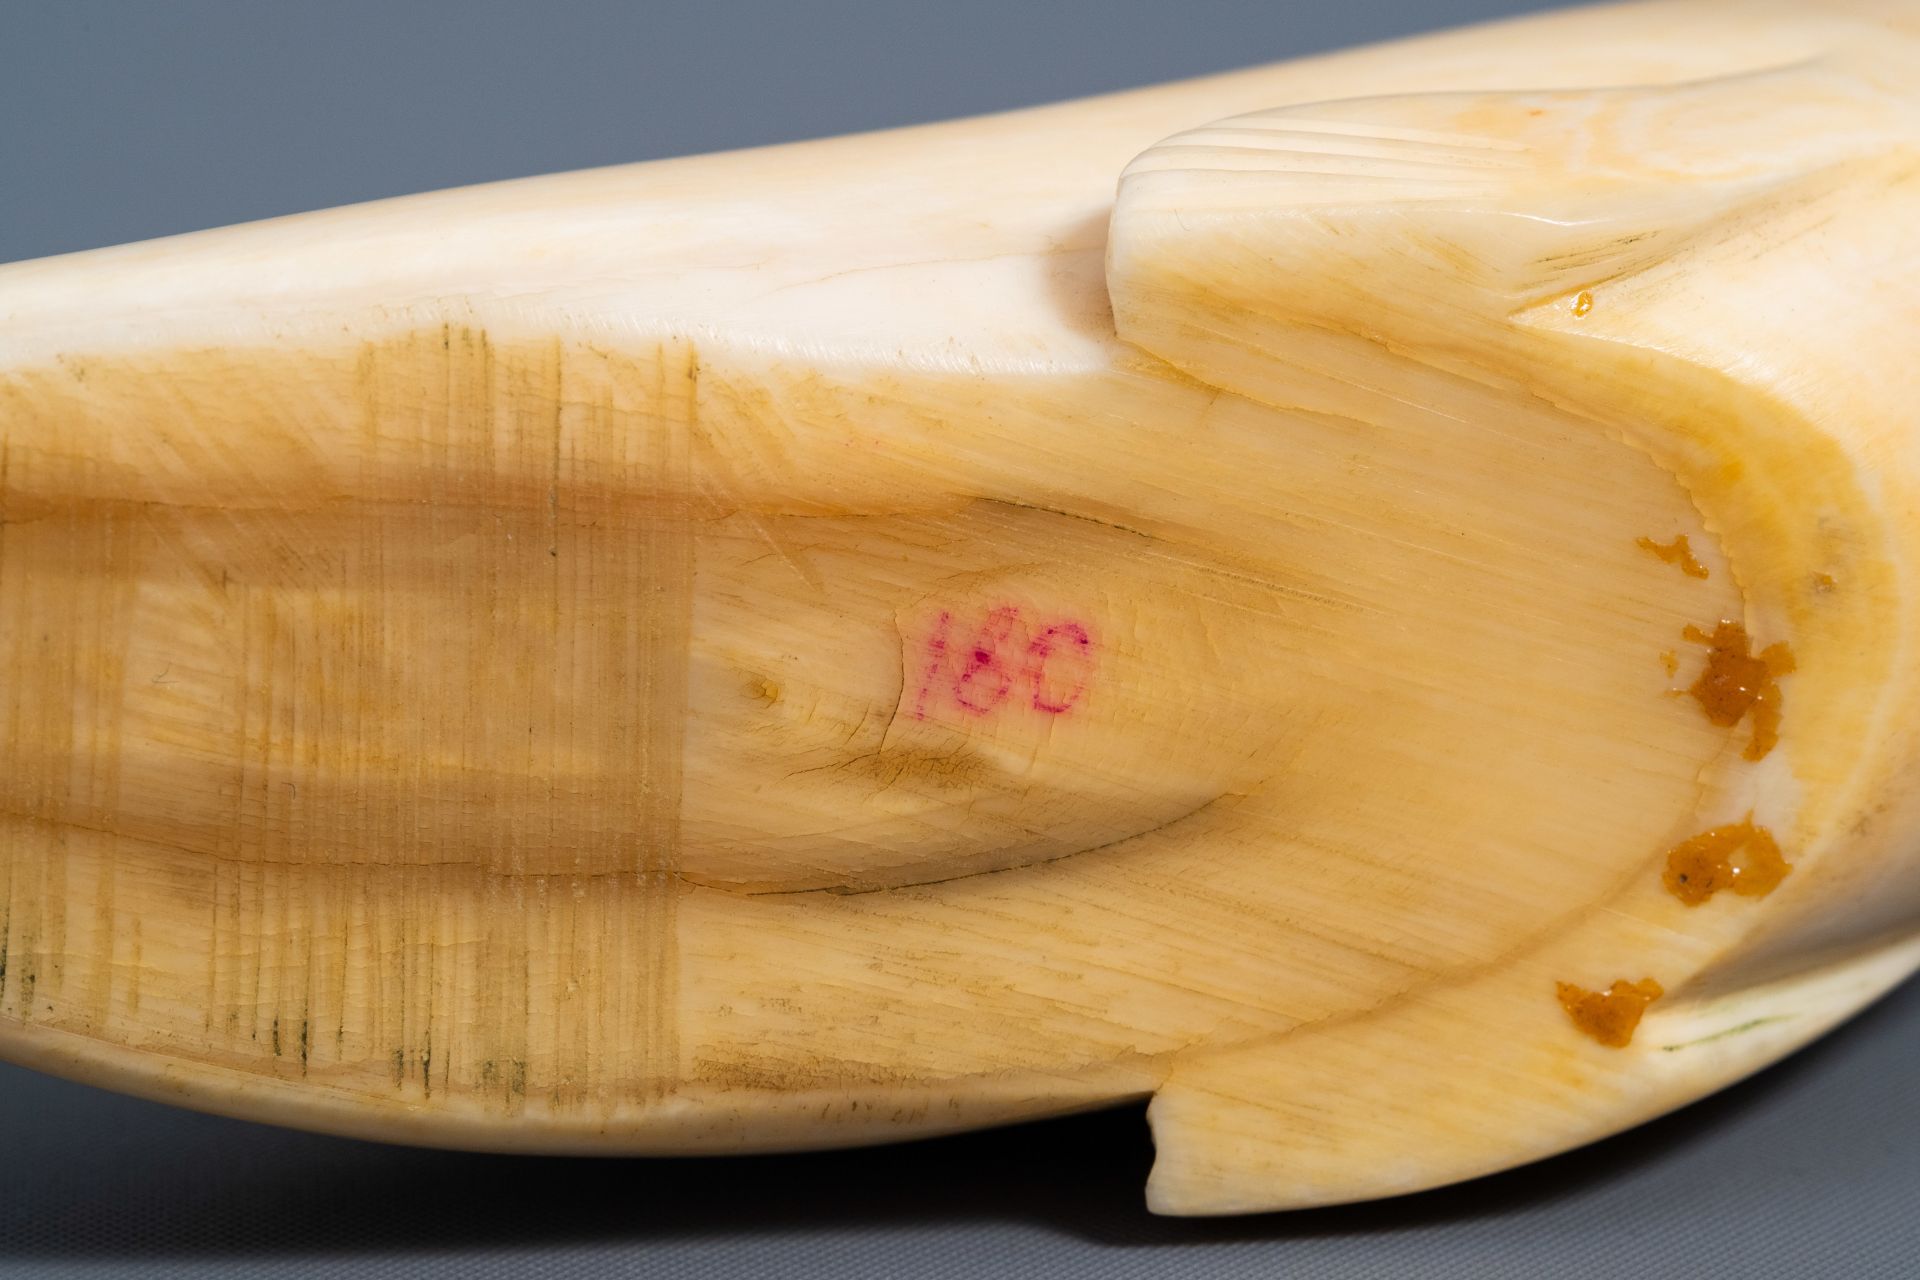 An Inuit carved whale ivory figure of a seal, Canada or Alaska, 19th C. - Image 9 of 11